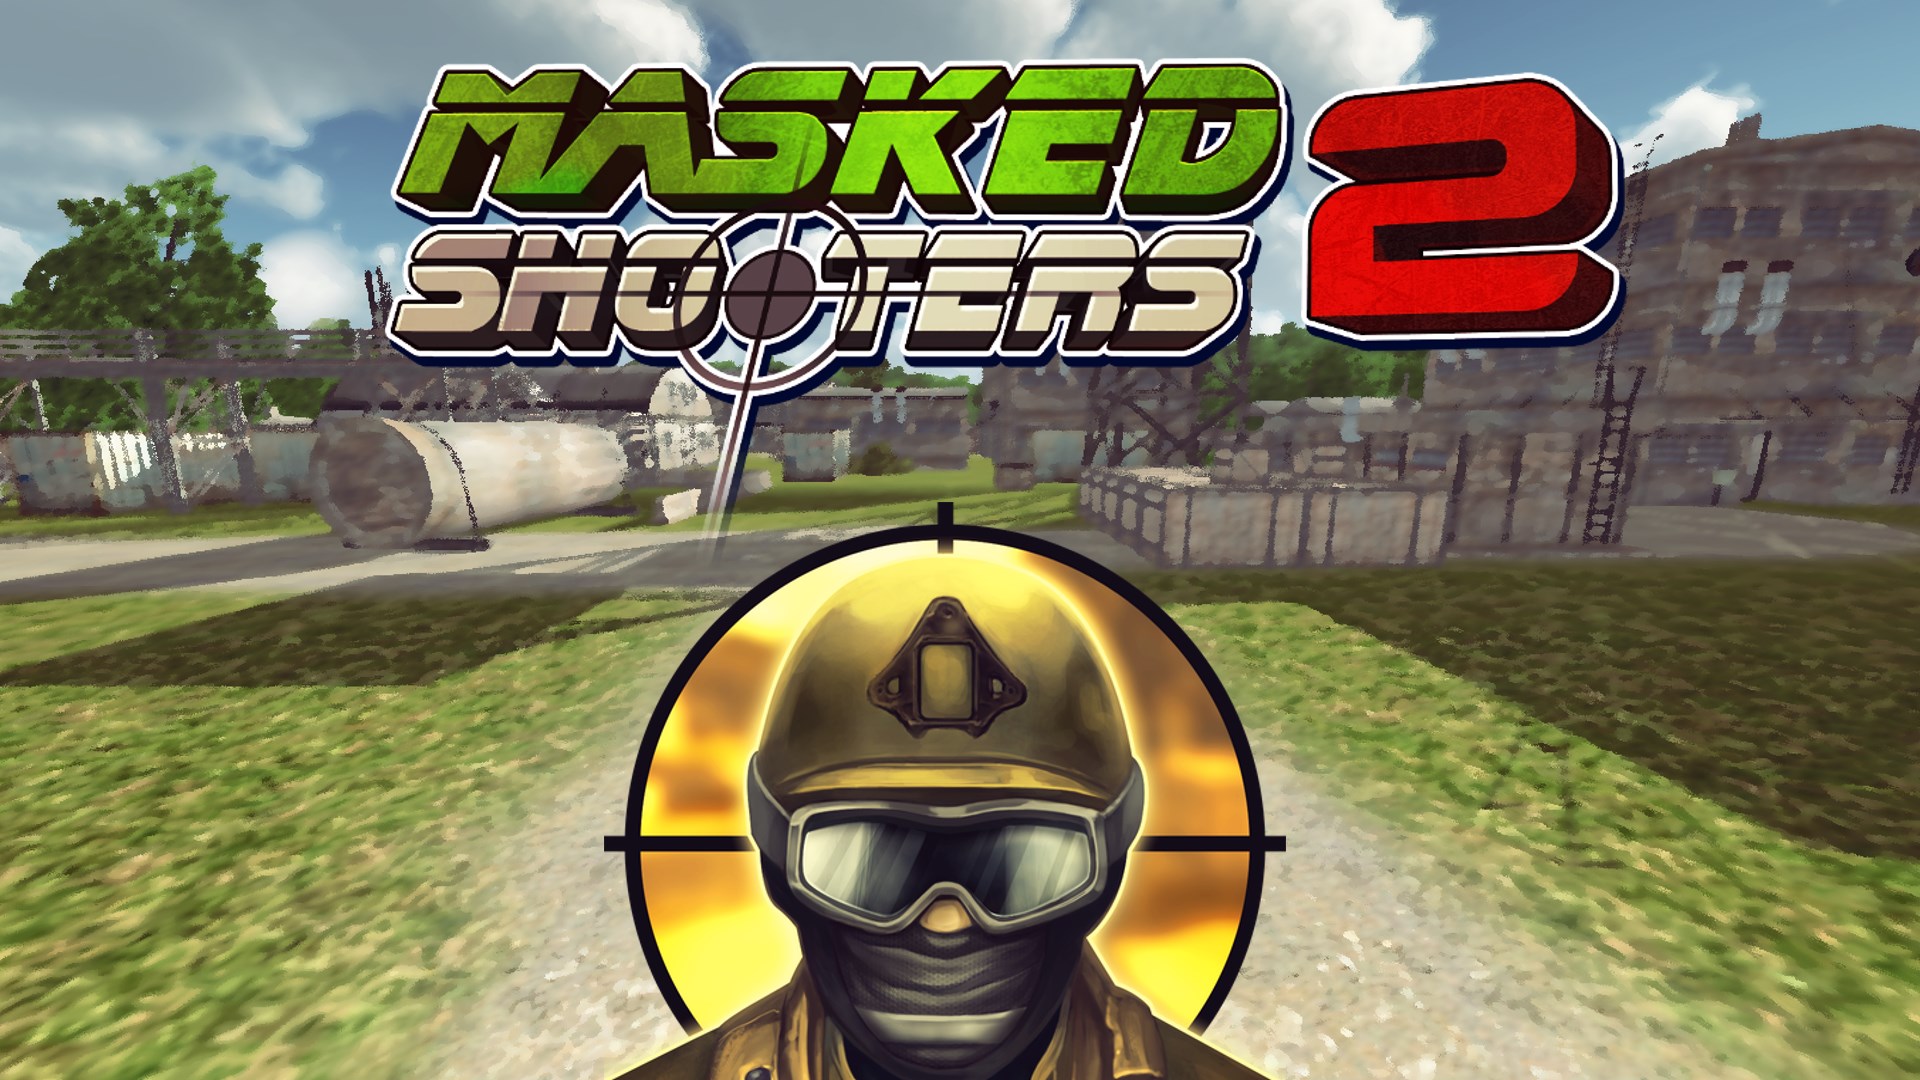 Buy Masked Shooters 2 Microsoft Store